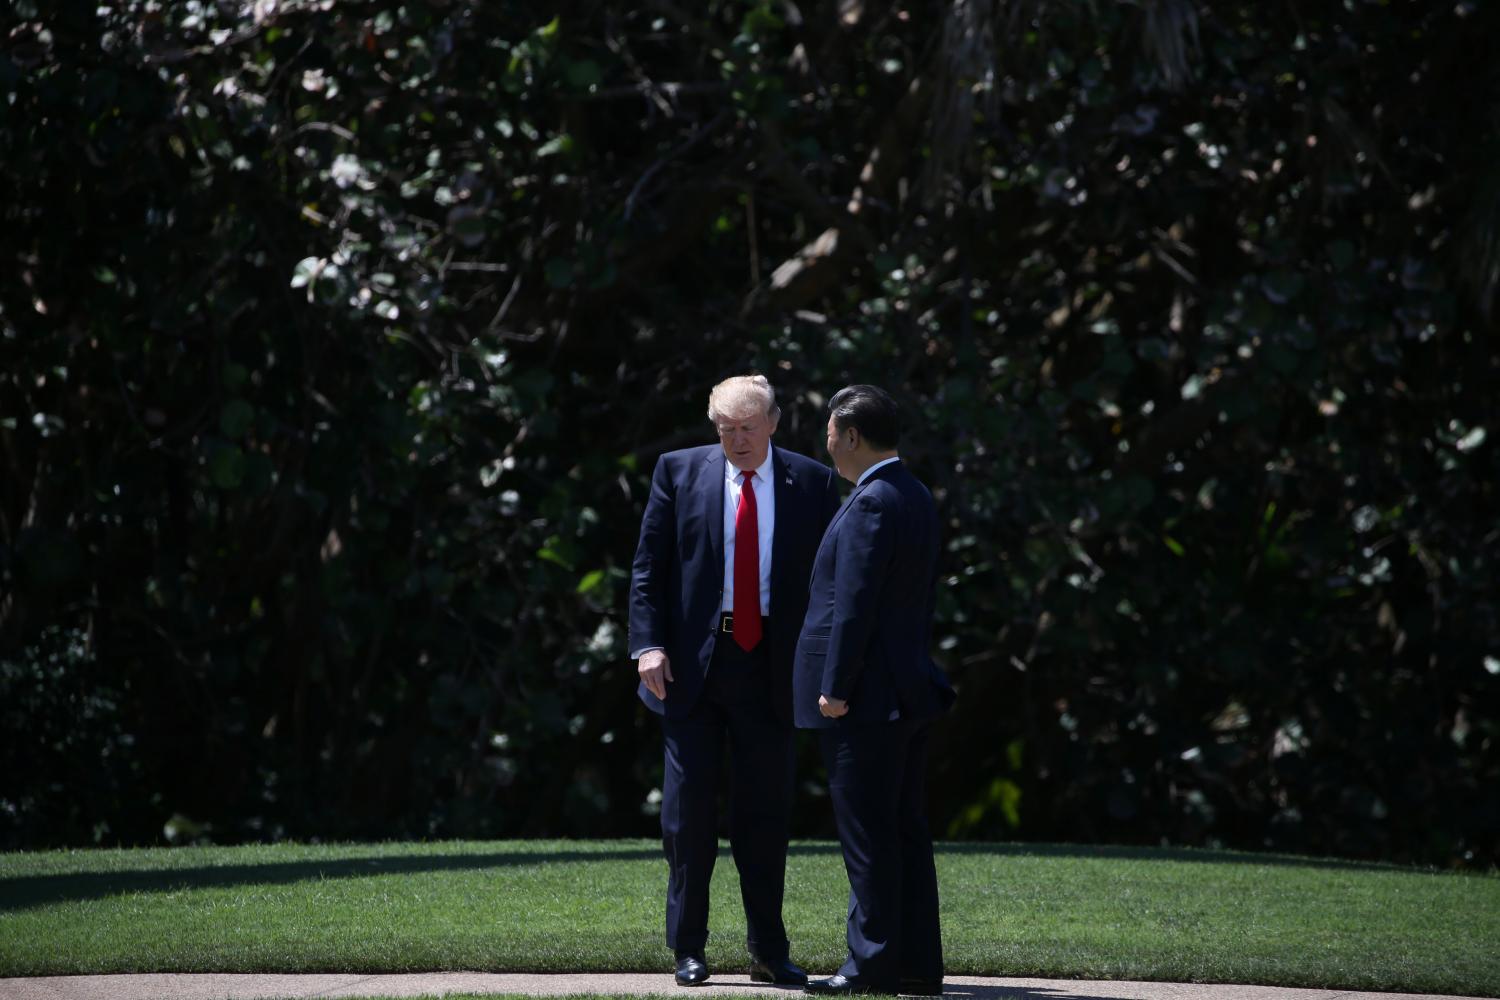 U.S. President Donald Trump and China's President Xi Jinping chat as they walk along the front patio of the Mar-a-Lago estate after a bilateral meeting in Palm Beach, Florida, U.S., April 7, 2017. REUTERS/Carlos Barria - RTX34MA2